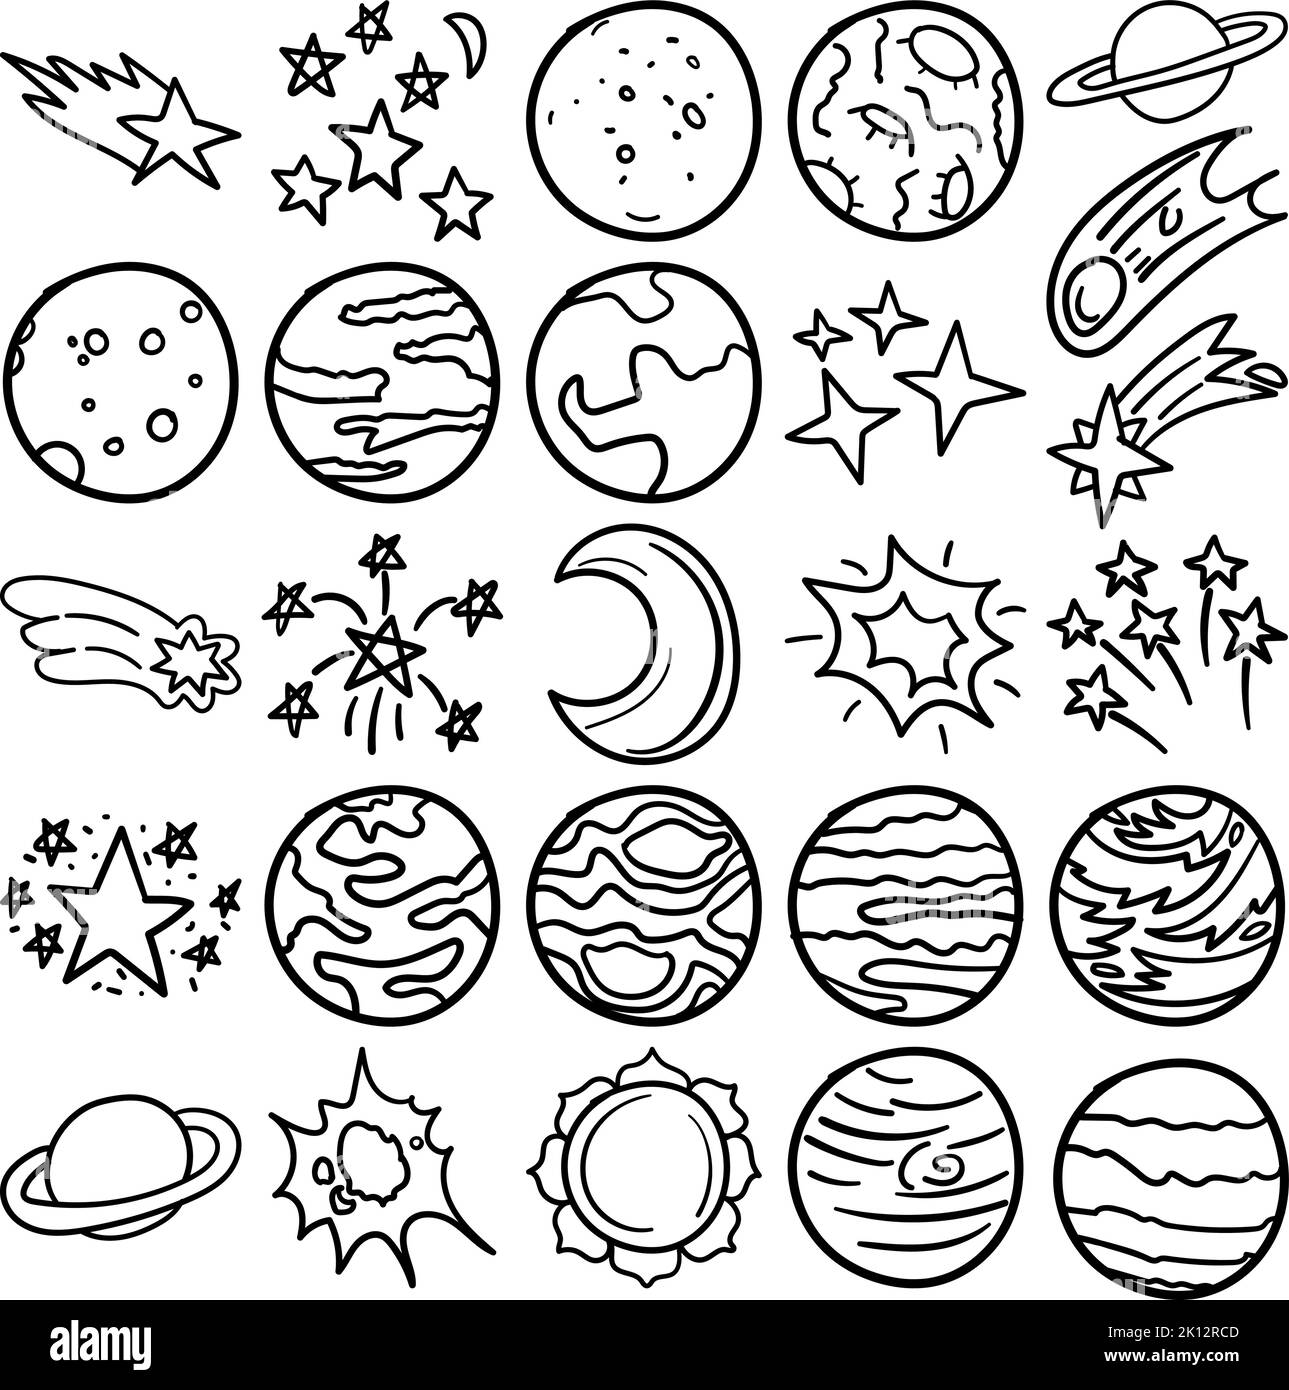 Space Hand Drawn Doodle Line Art Outline Set Containing space, universe, galaxy, cosmos, solar system, creation, nature, world, cosm, star system, sta Stock Vector